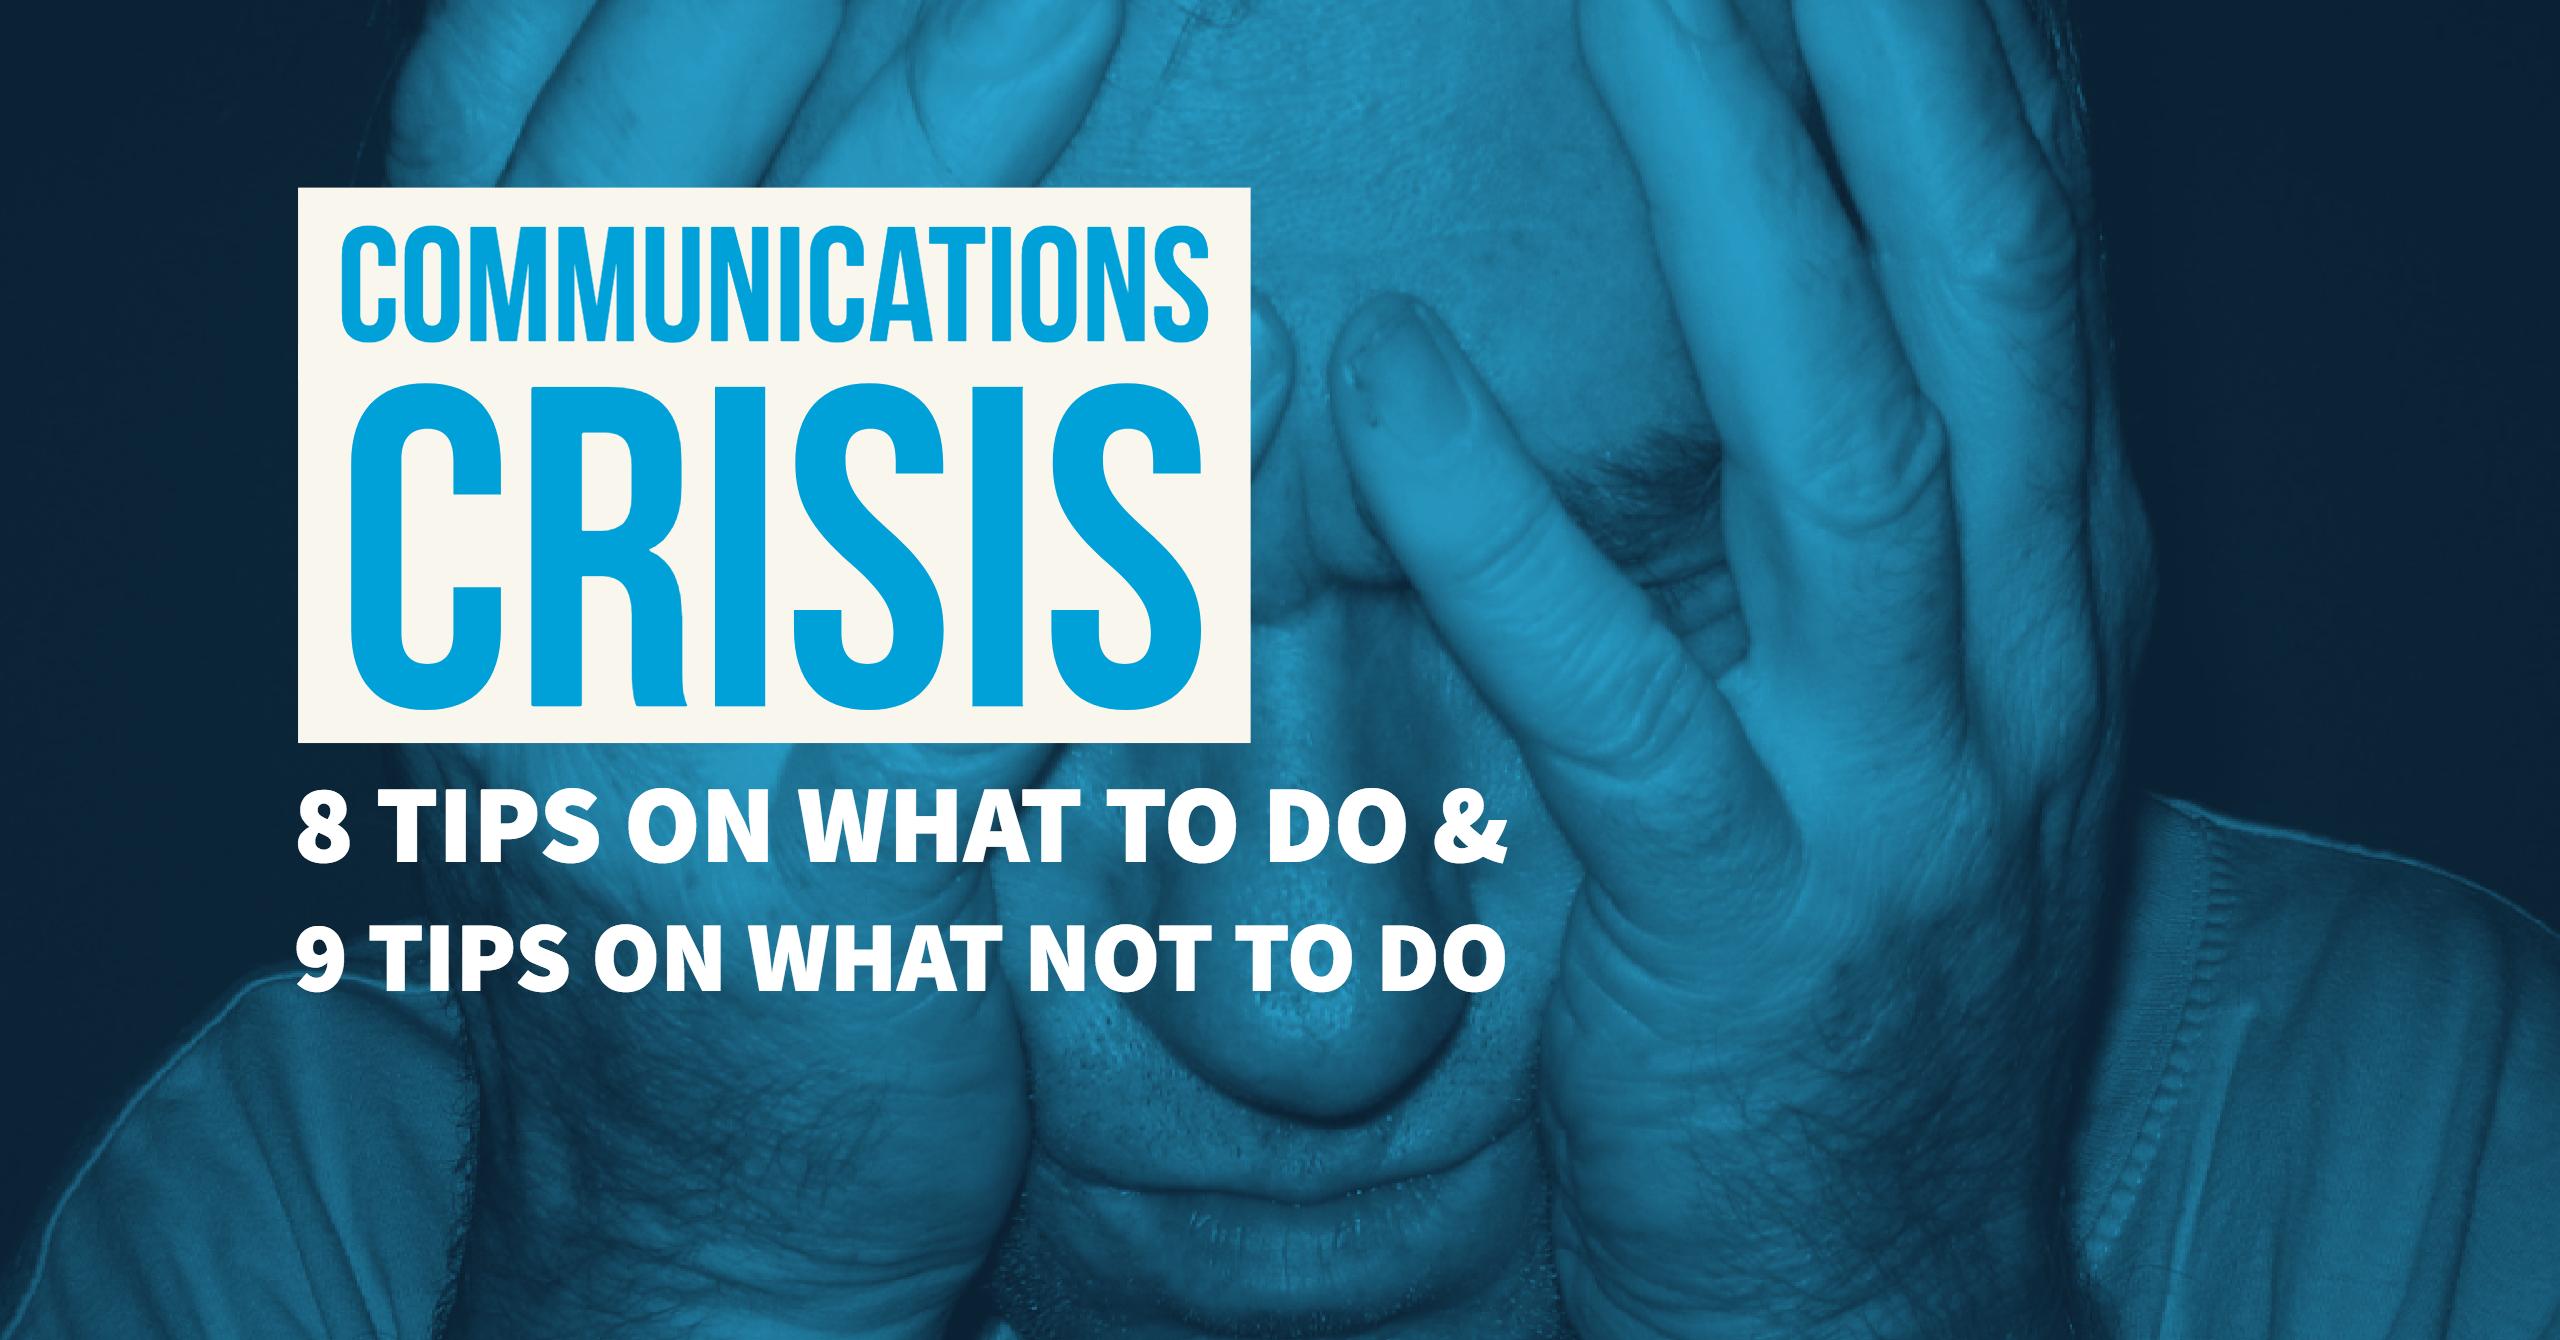 17 tips for managing crisis communications